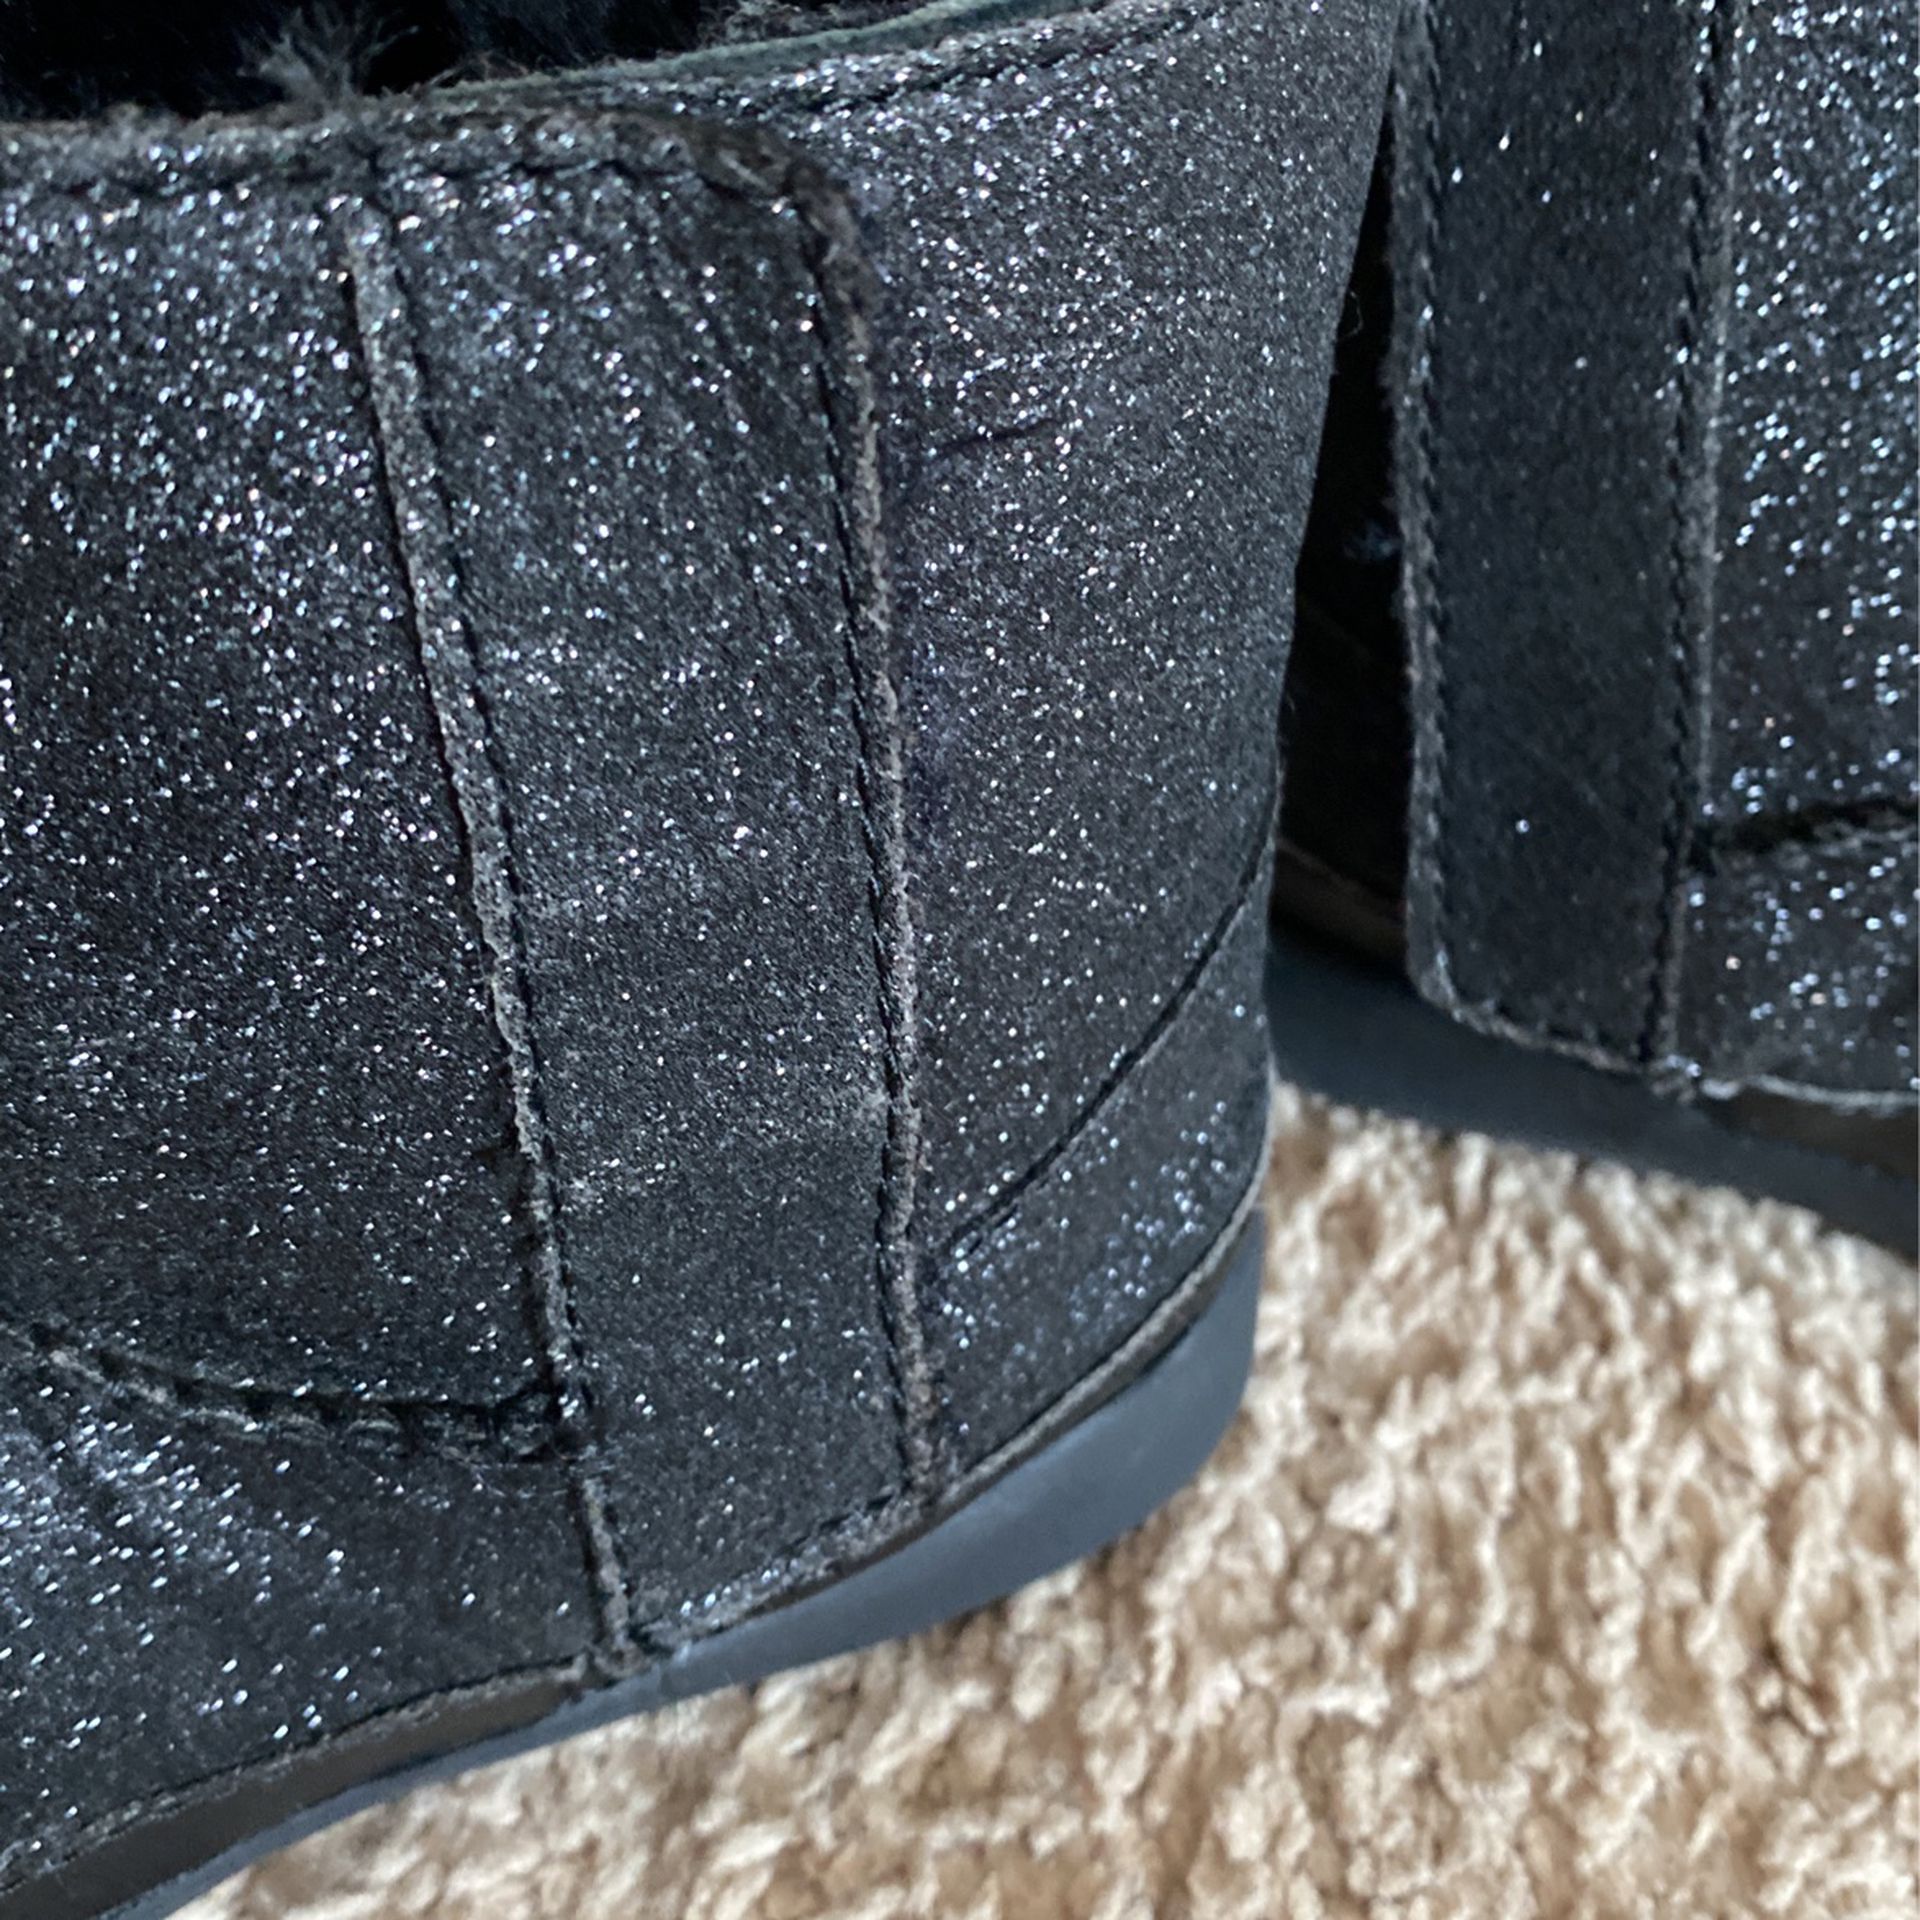 Toddler Ugg Boots Size 10c